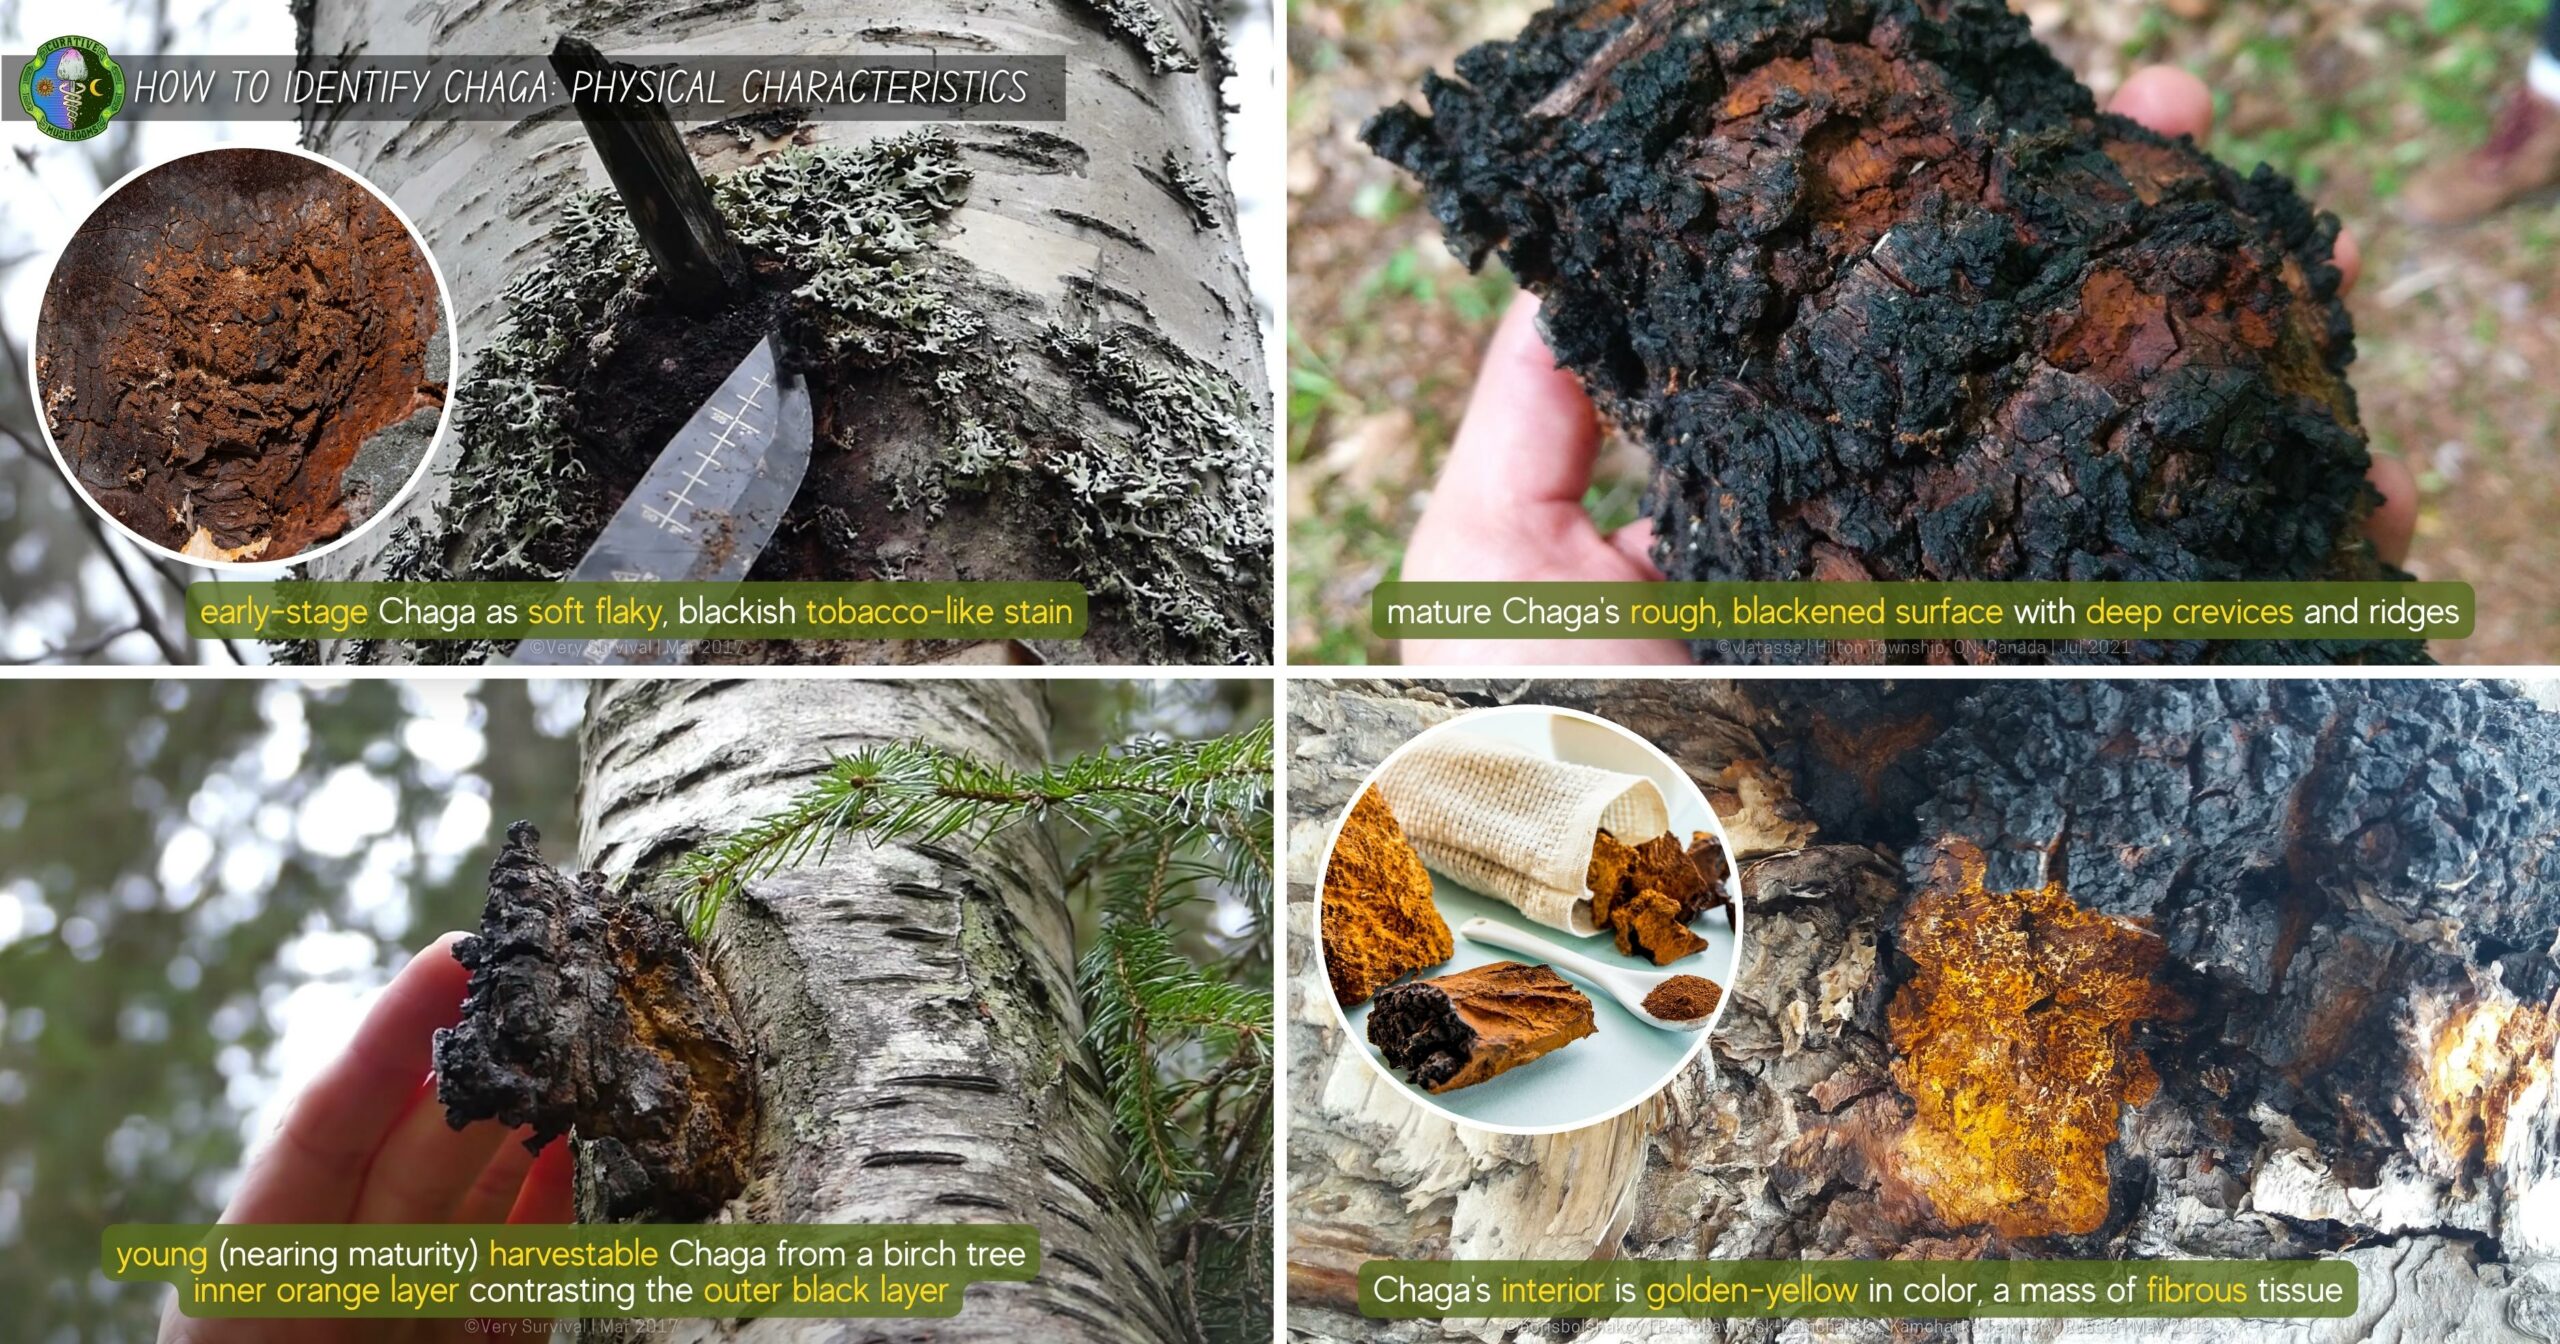 How to identify Chaga Physical Characteristics - early-stage soft flaky tobacco stain - mature rough, black surface with deep crevices - interior is golden-yellow